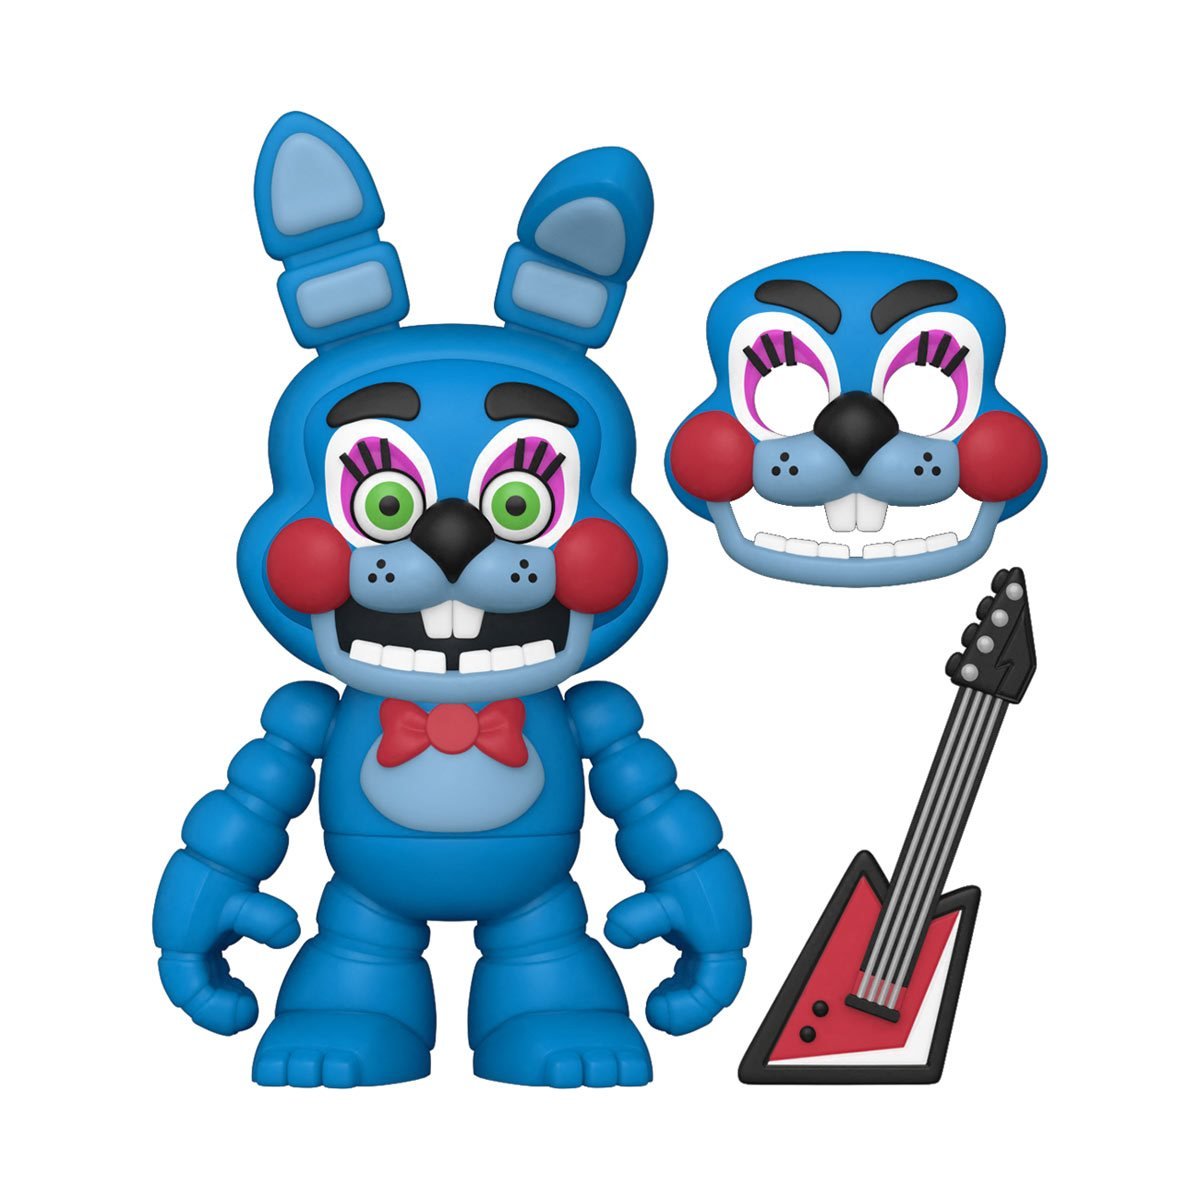 Five Nights at Freddys toy Bonnie Horror Game Art Sculpture